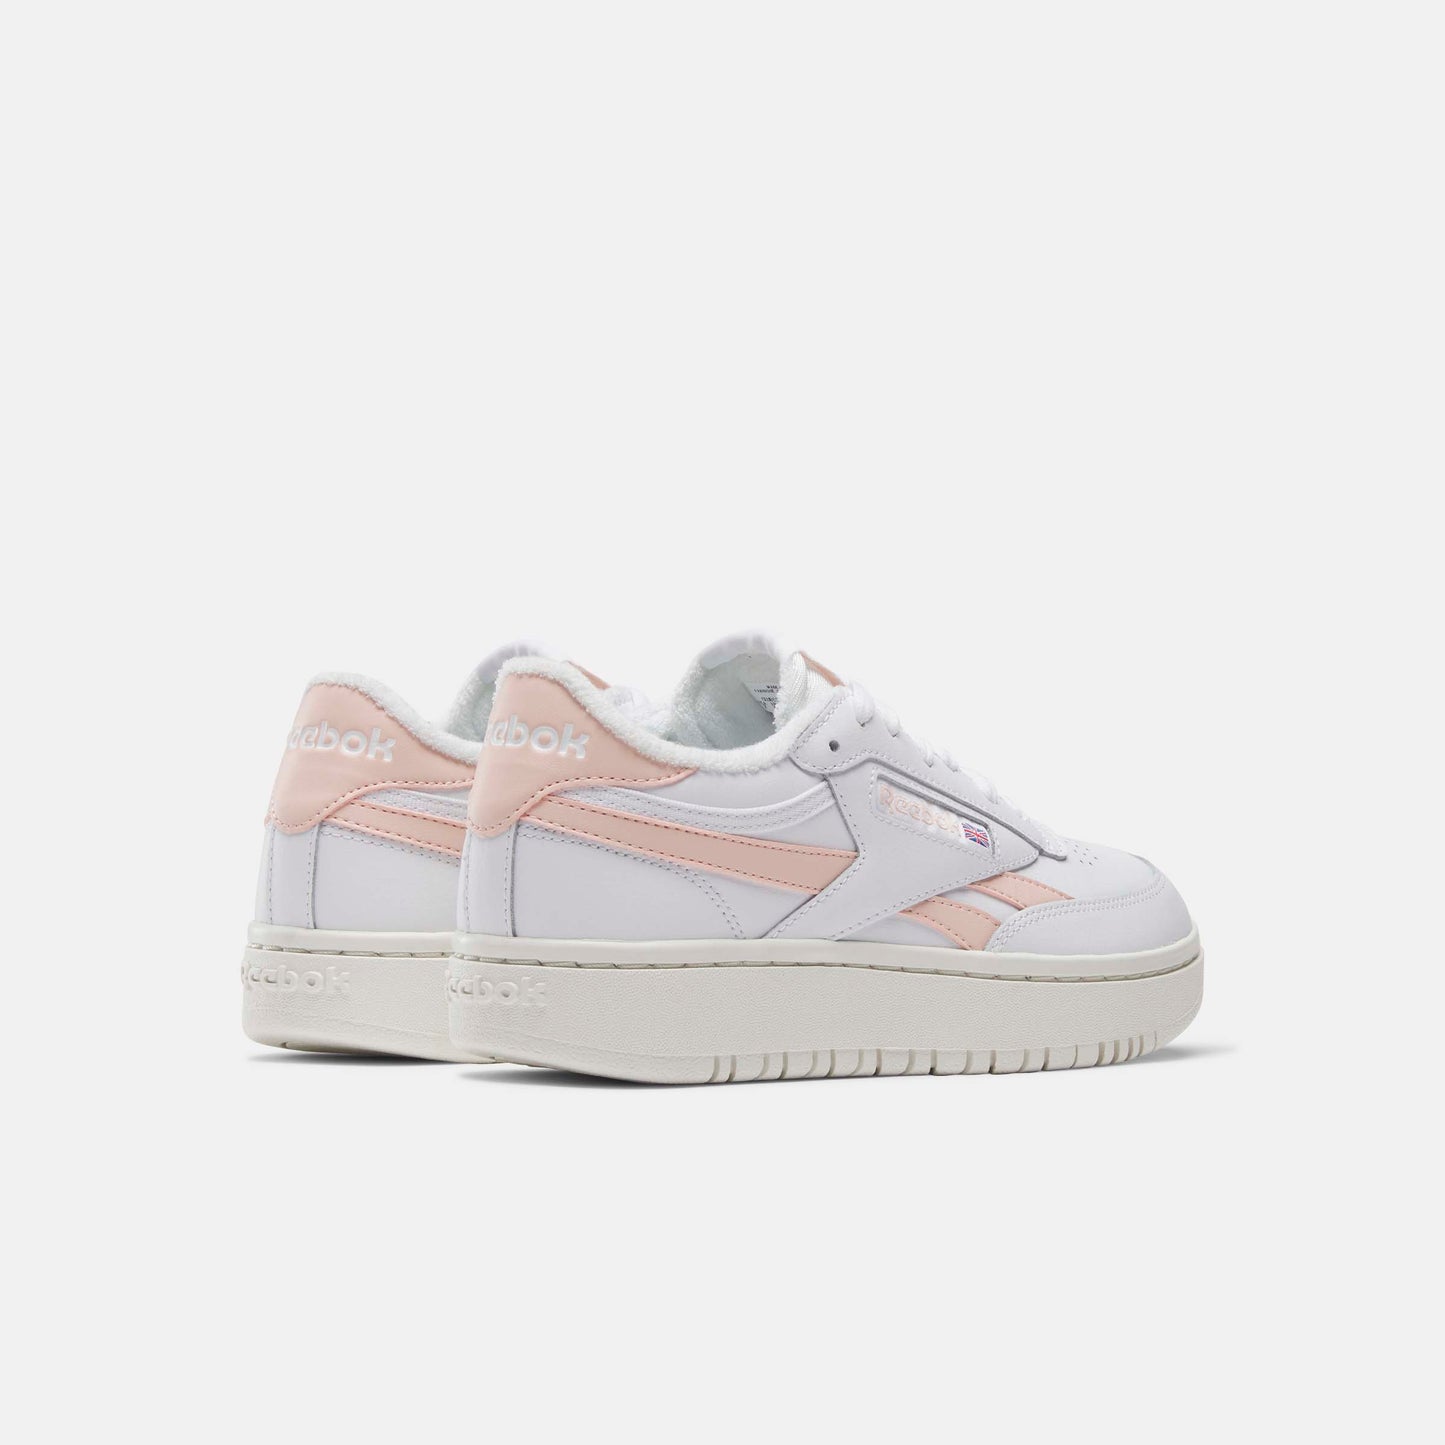 Club C Double Women's Shoes Chalk/Possibly Pink/White